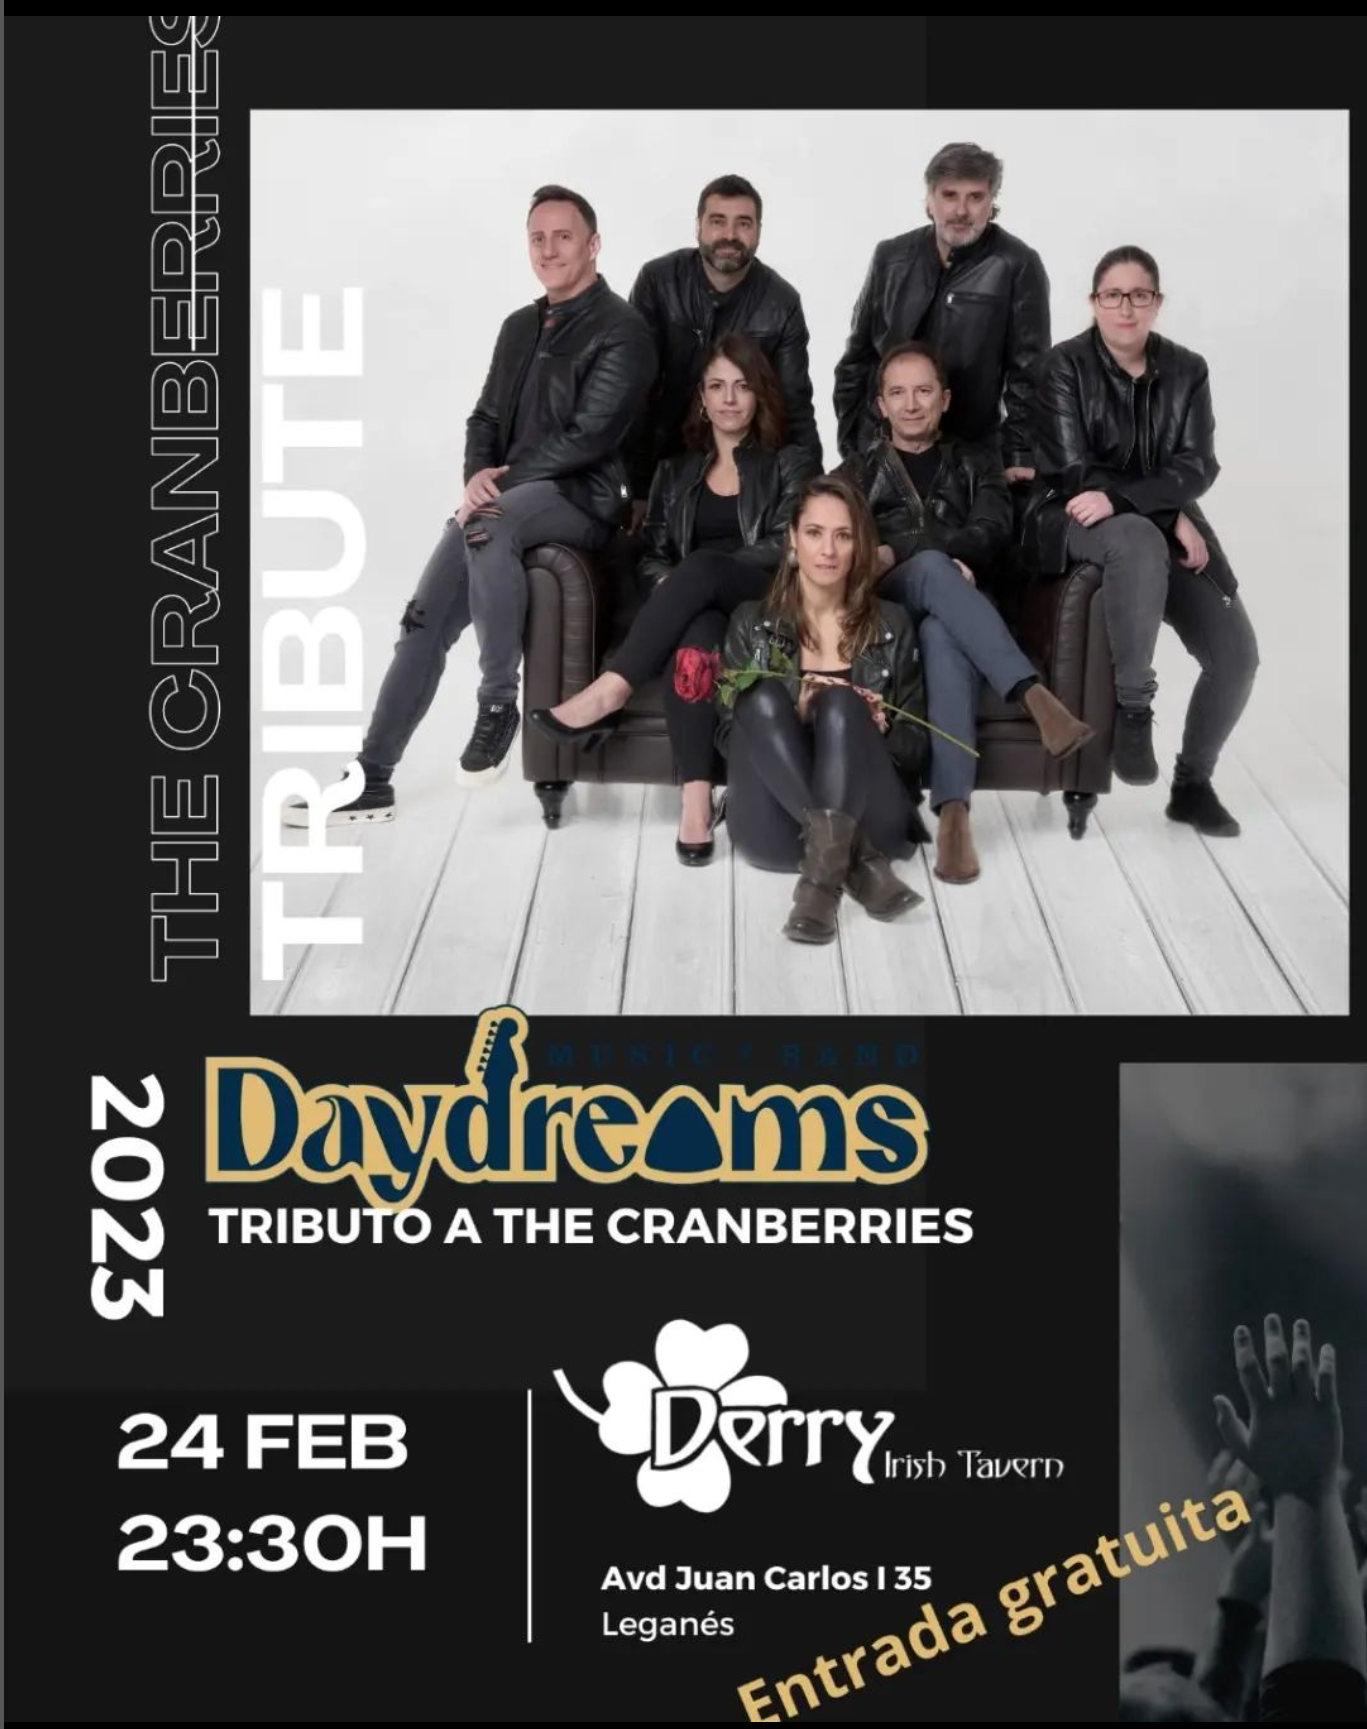 DayDreams tributo a The Cranberries